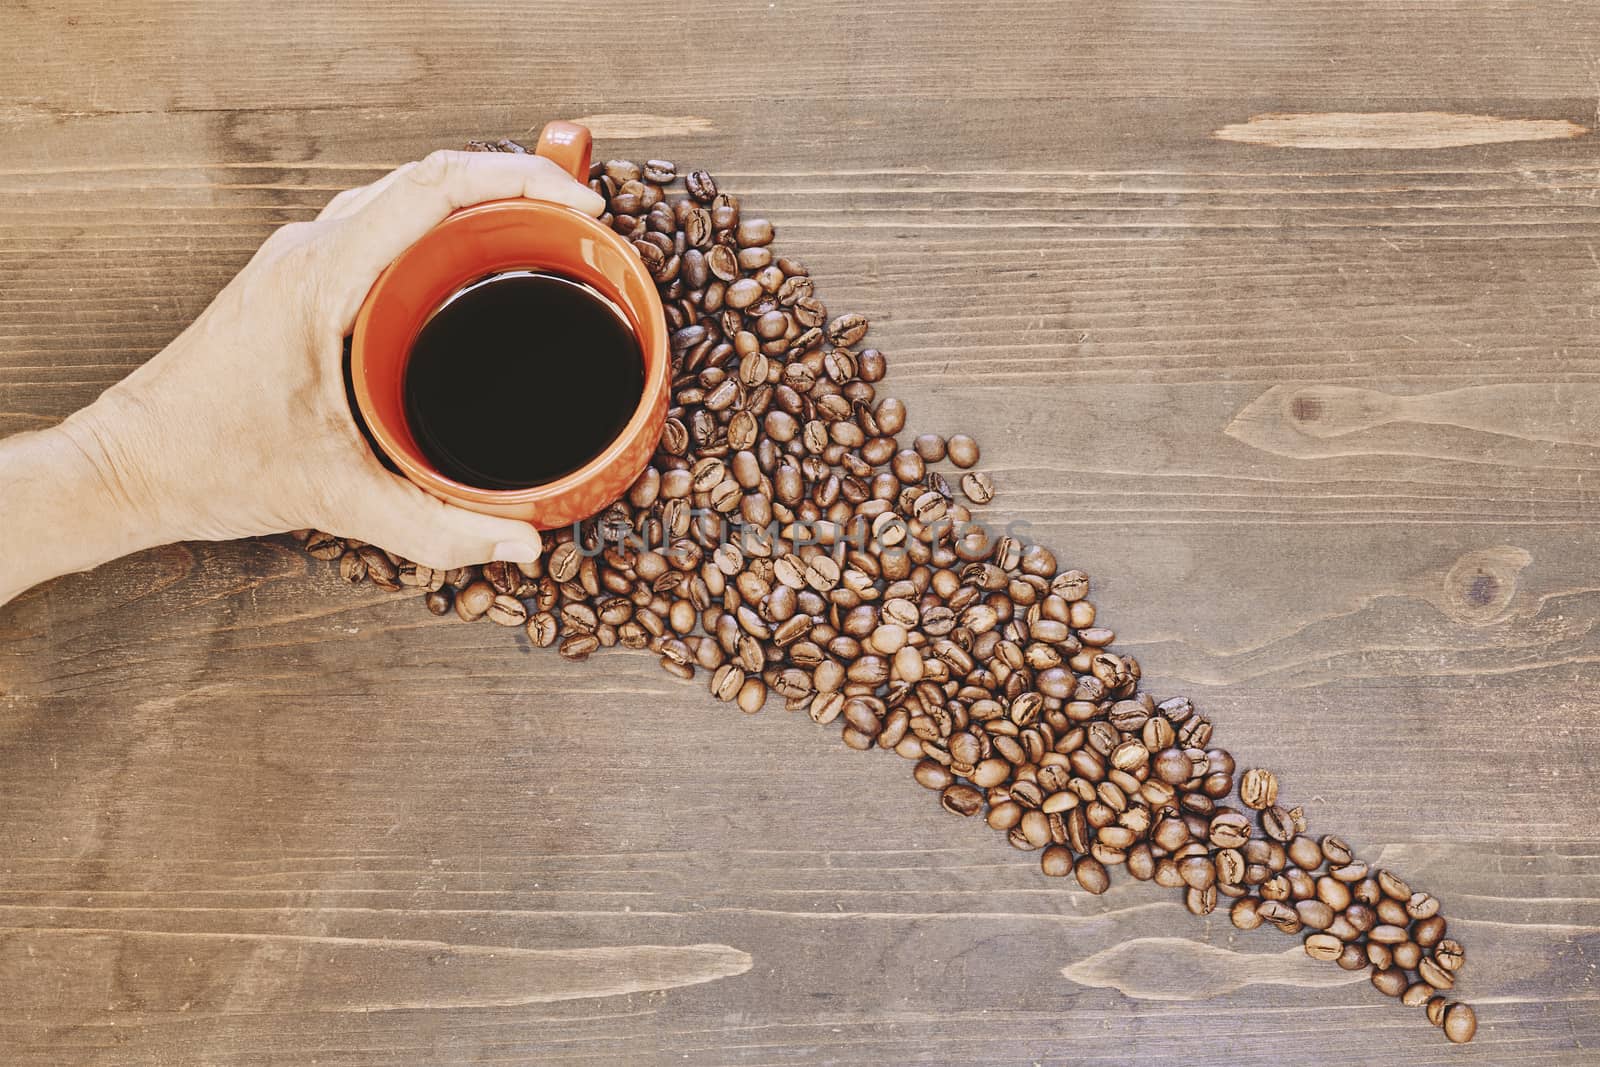 Top view of a person holding a cup of coffee with roasted coffee beans on the table